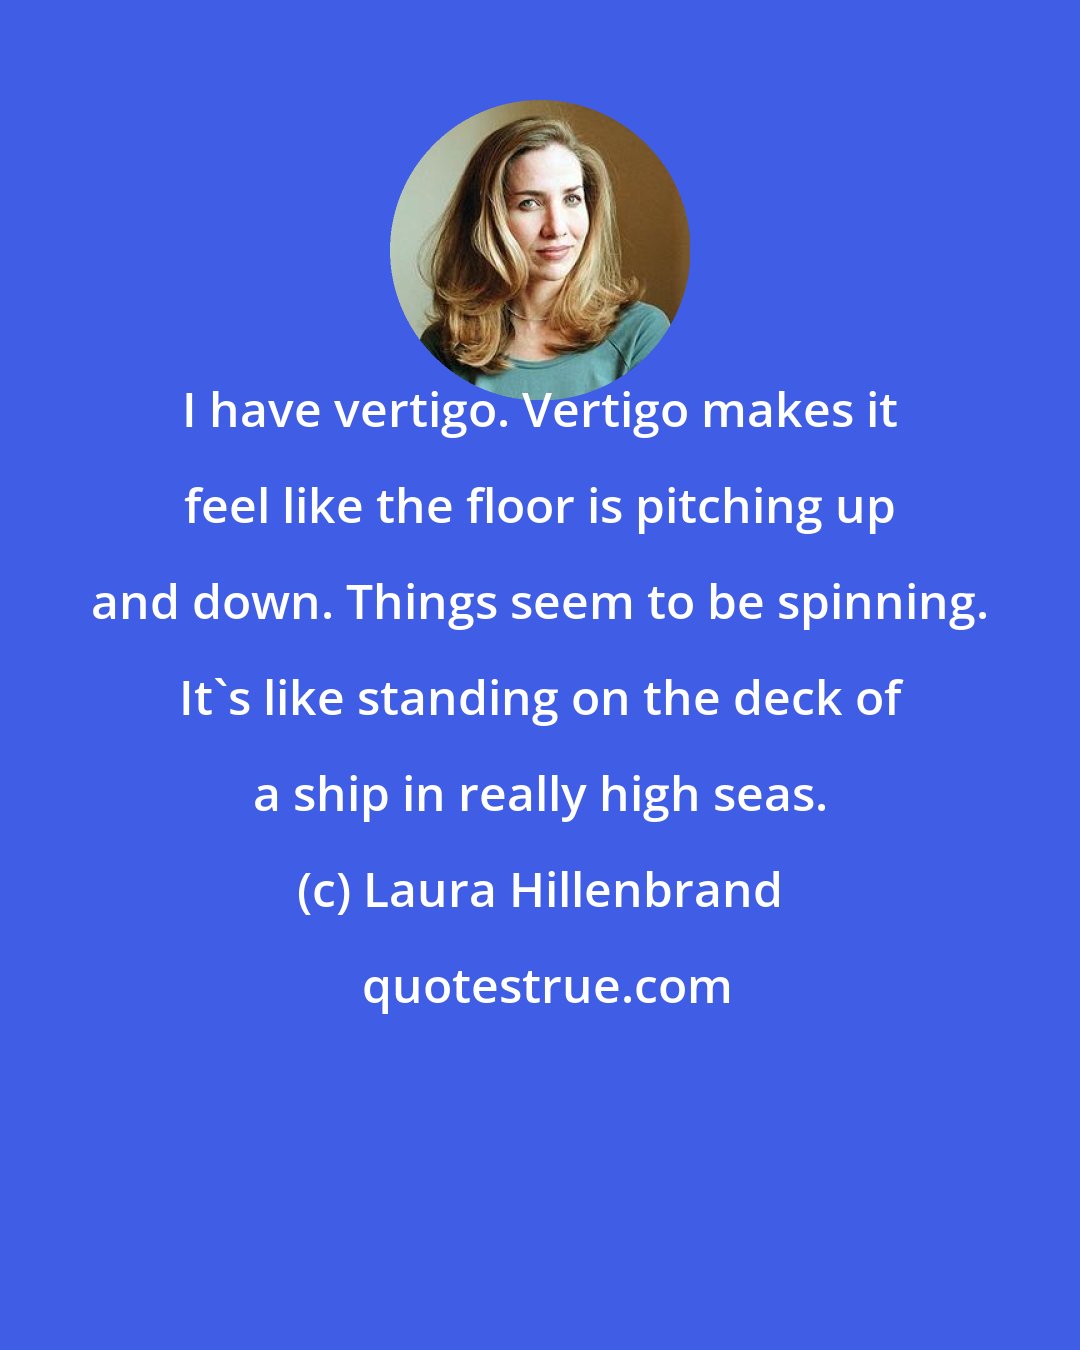 Laura Hillenbrand: I have vertigo. Vertigo makes it feel like the floor is pitching up and down. Things seem to be spinning. It's like standing on the deck of a ship in really high seas.